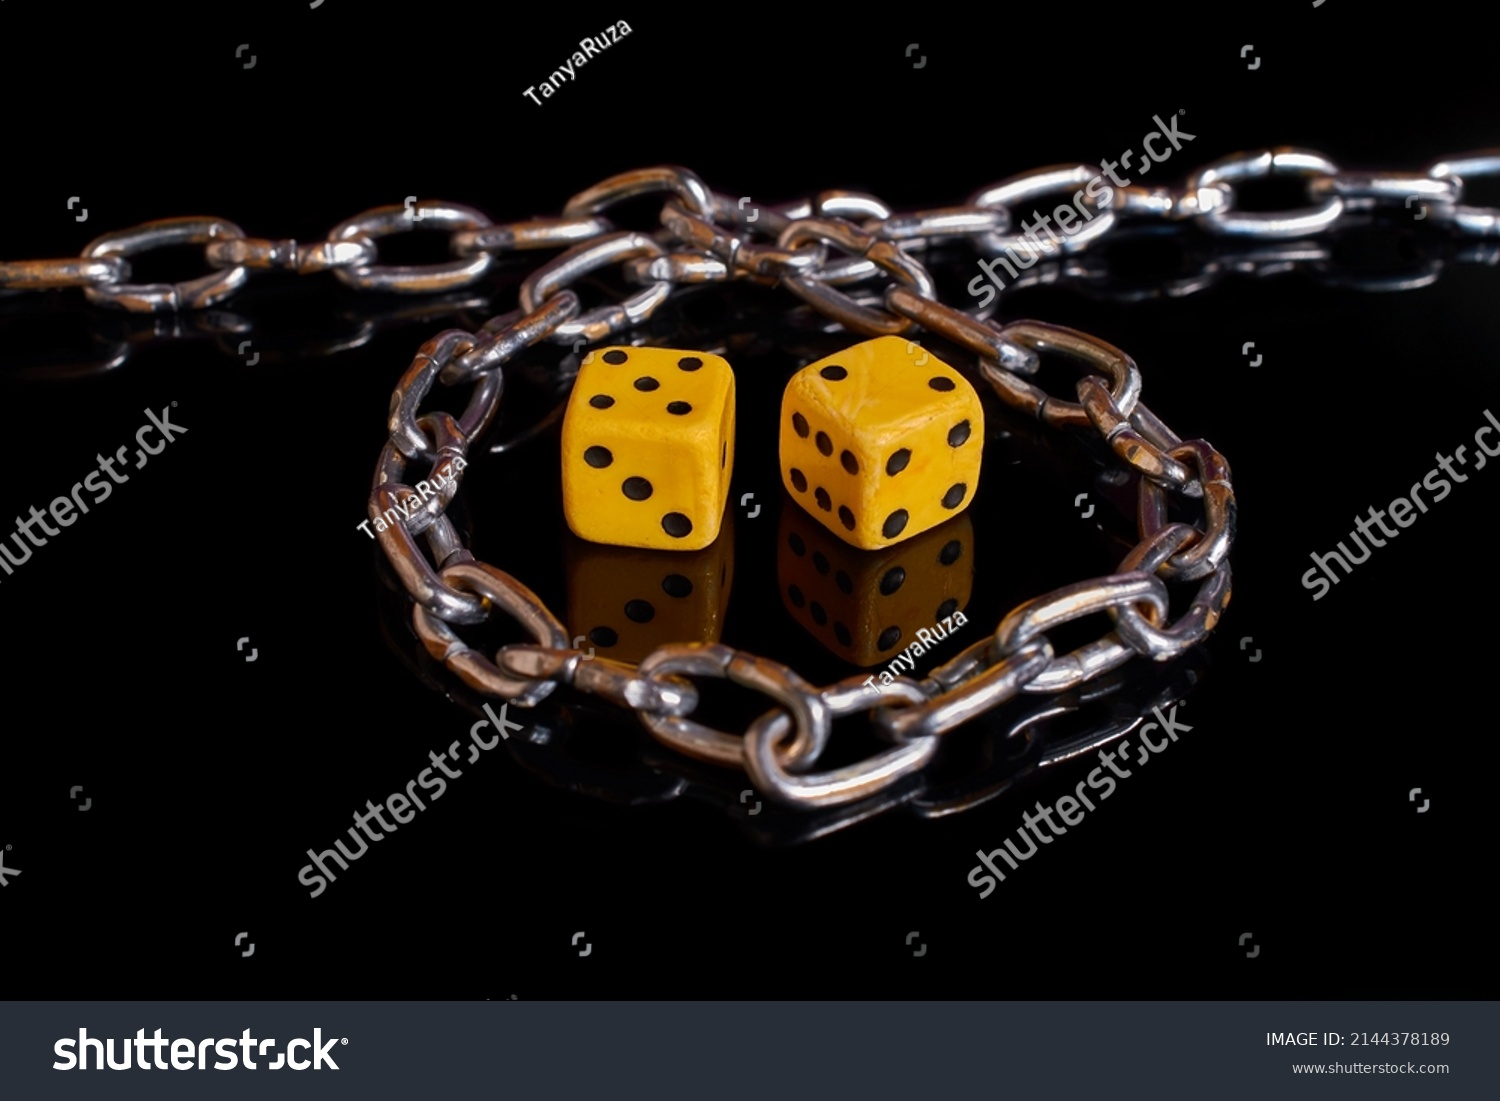 Gambling addiction. Two dice wrapped in a chain on a black background with reflection. Selective focus #2144378189